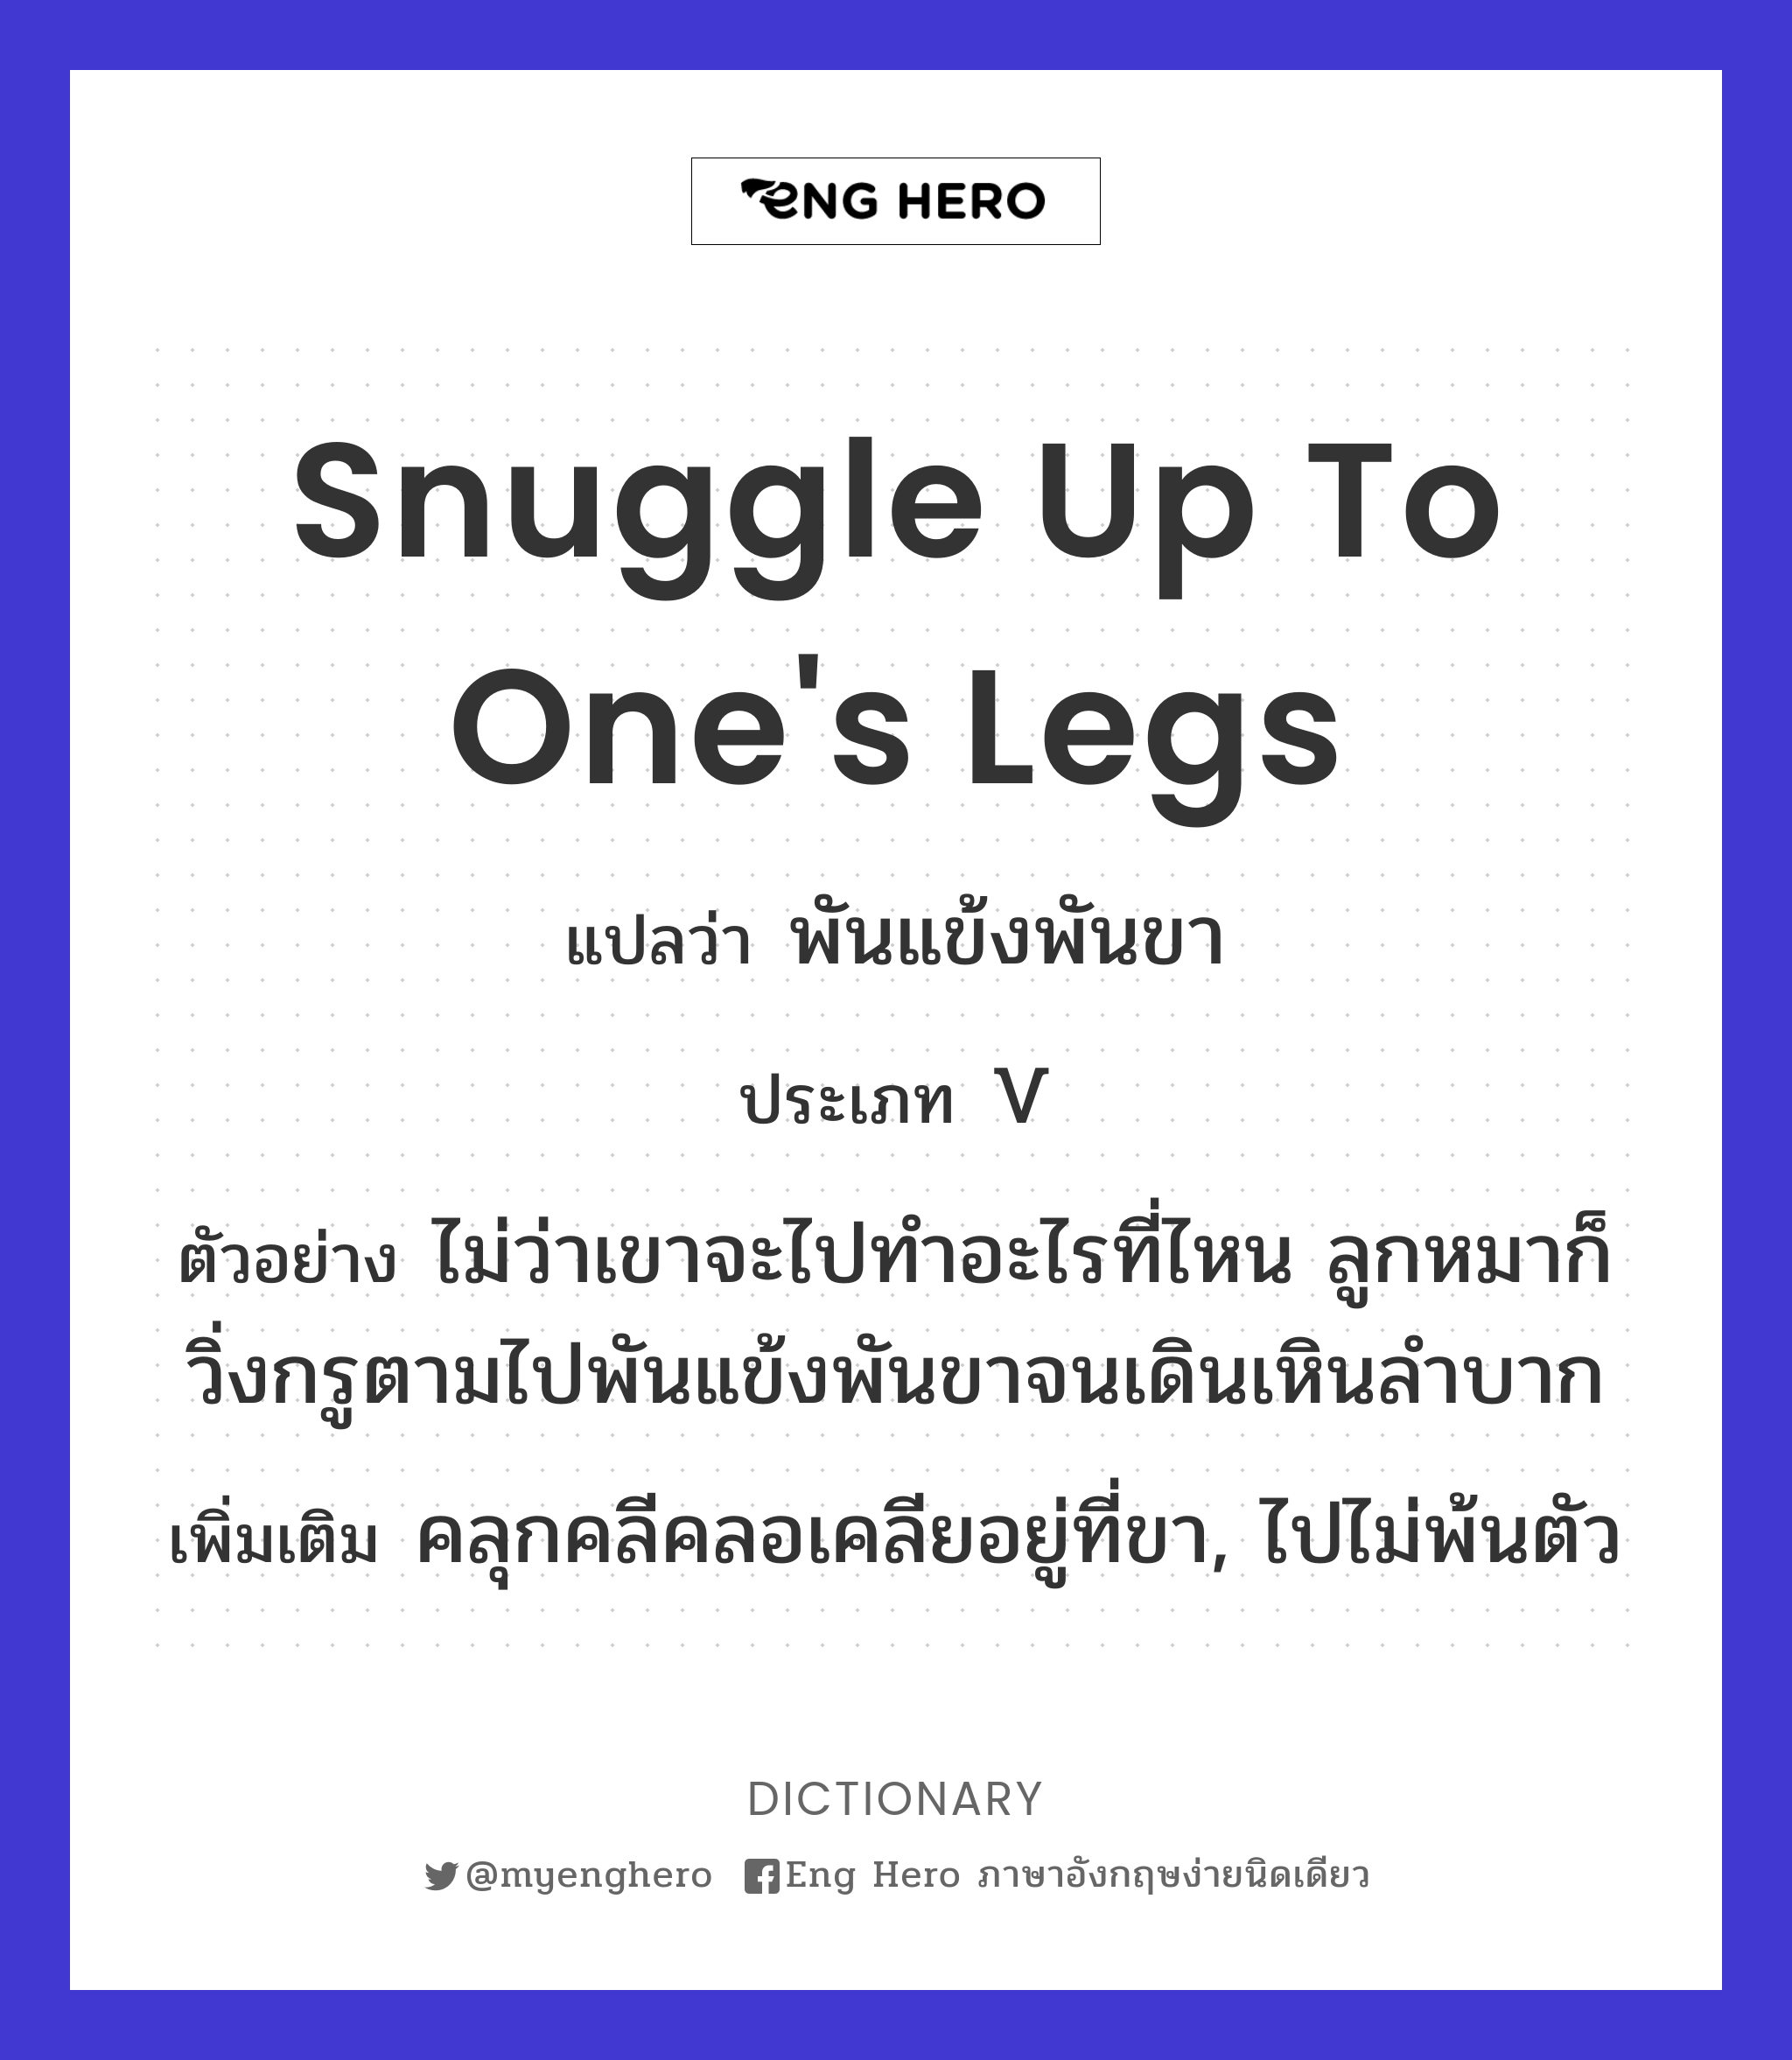 snuggle up to one's legs